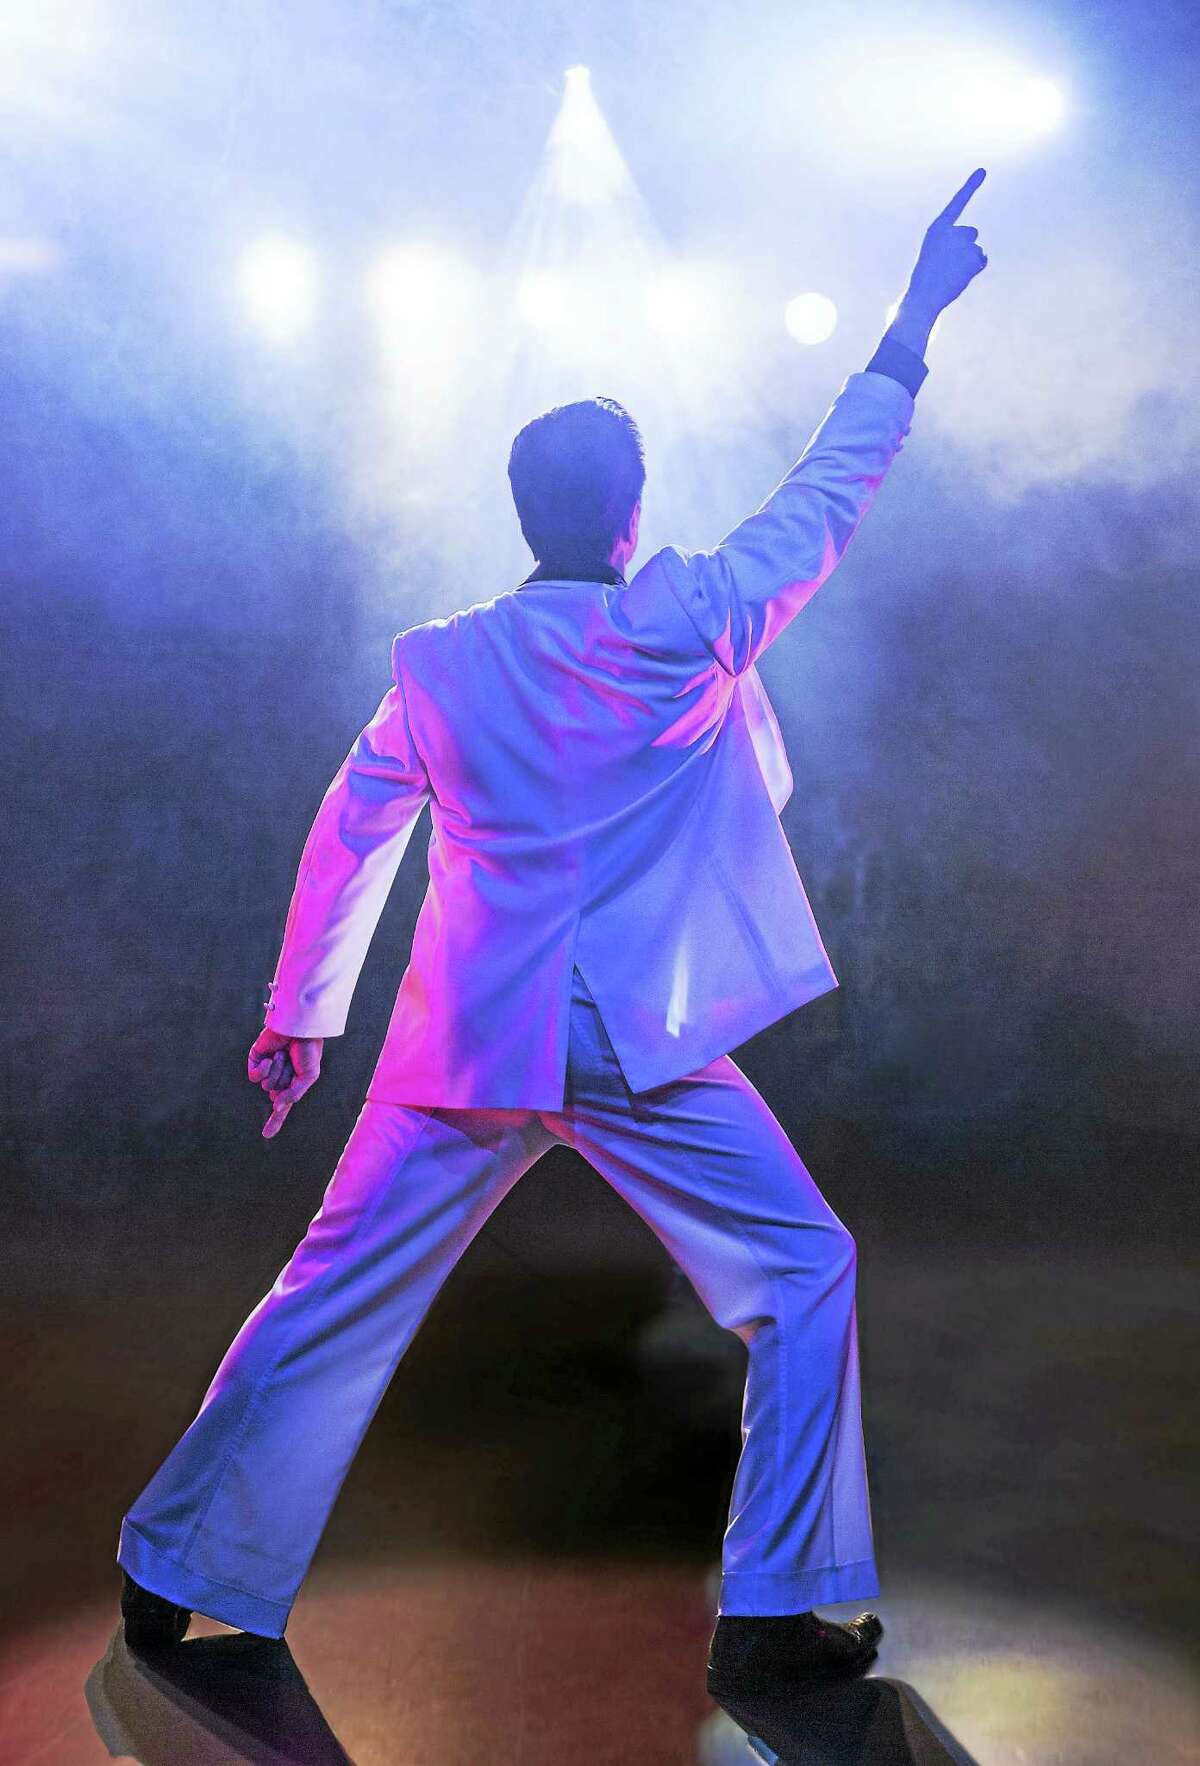 Photography by ©Erin O’Boyle PhotographicsSaturday Night Fever takes the Palace Theater stage later in February.